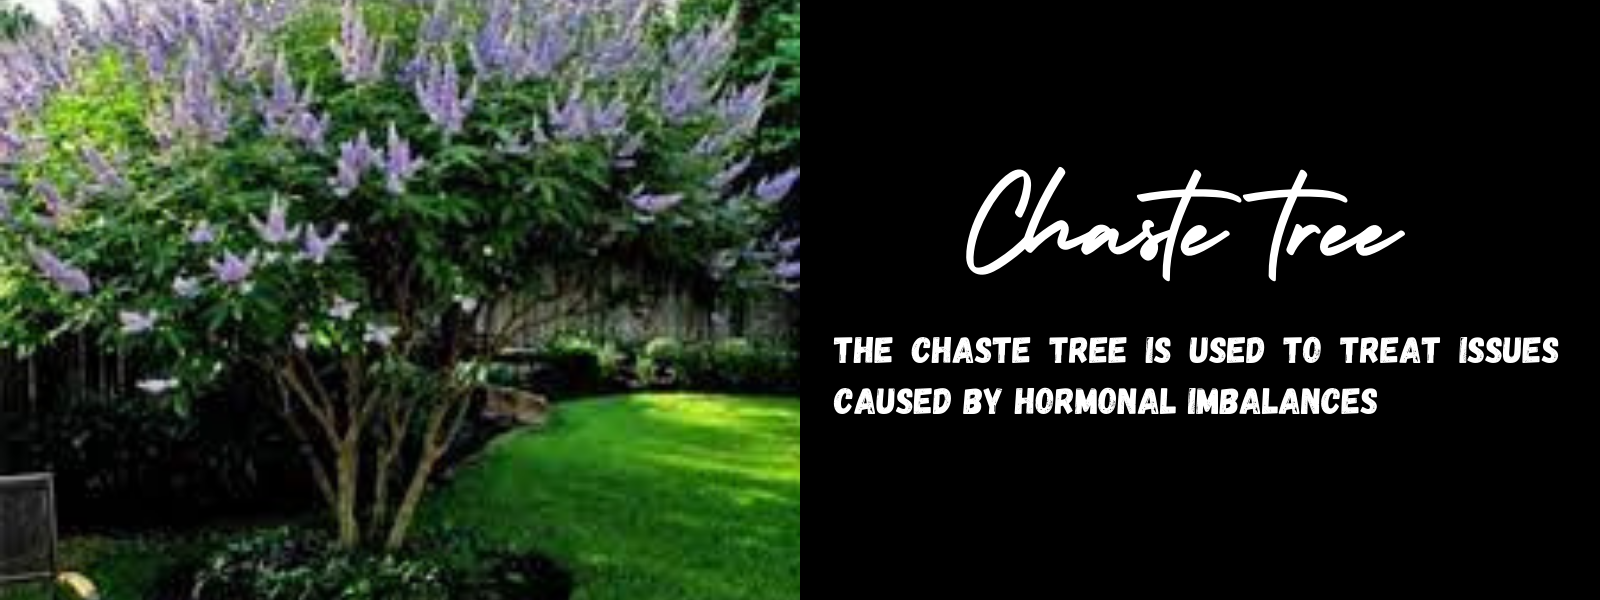 Chaste tree - Health Benefits, Uses and Important Facts